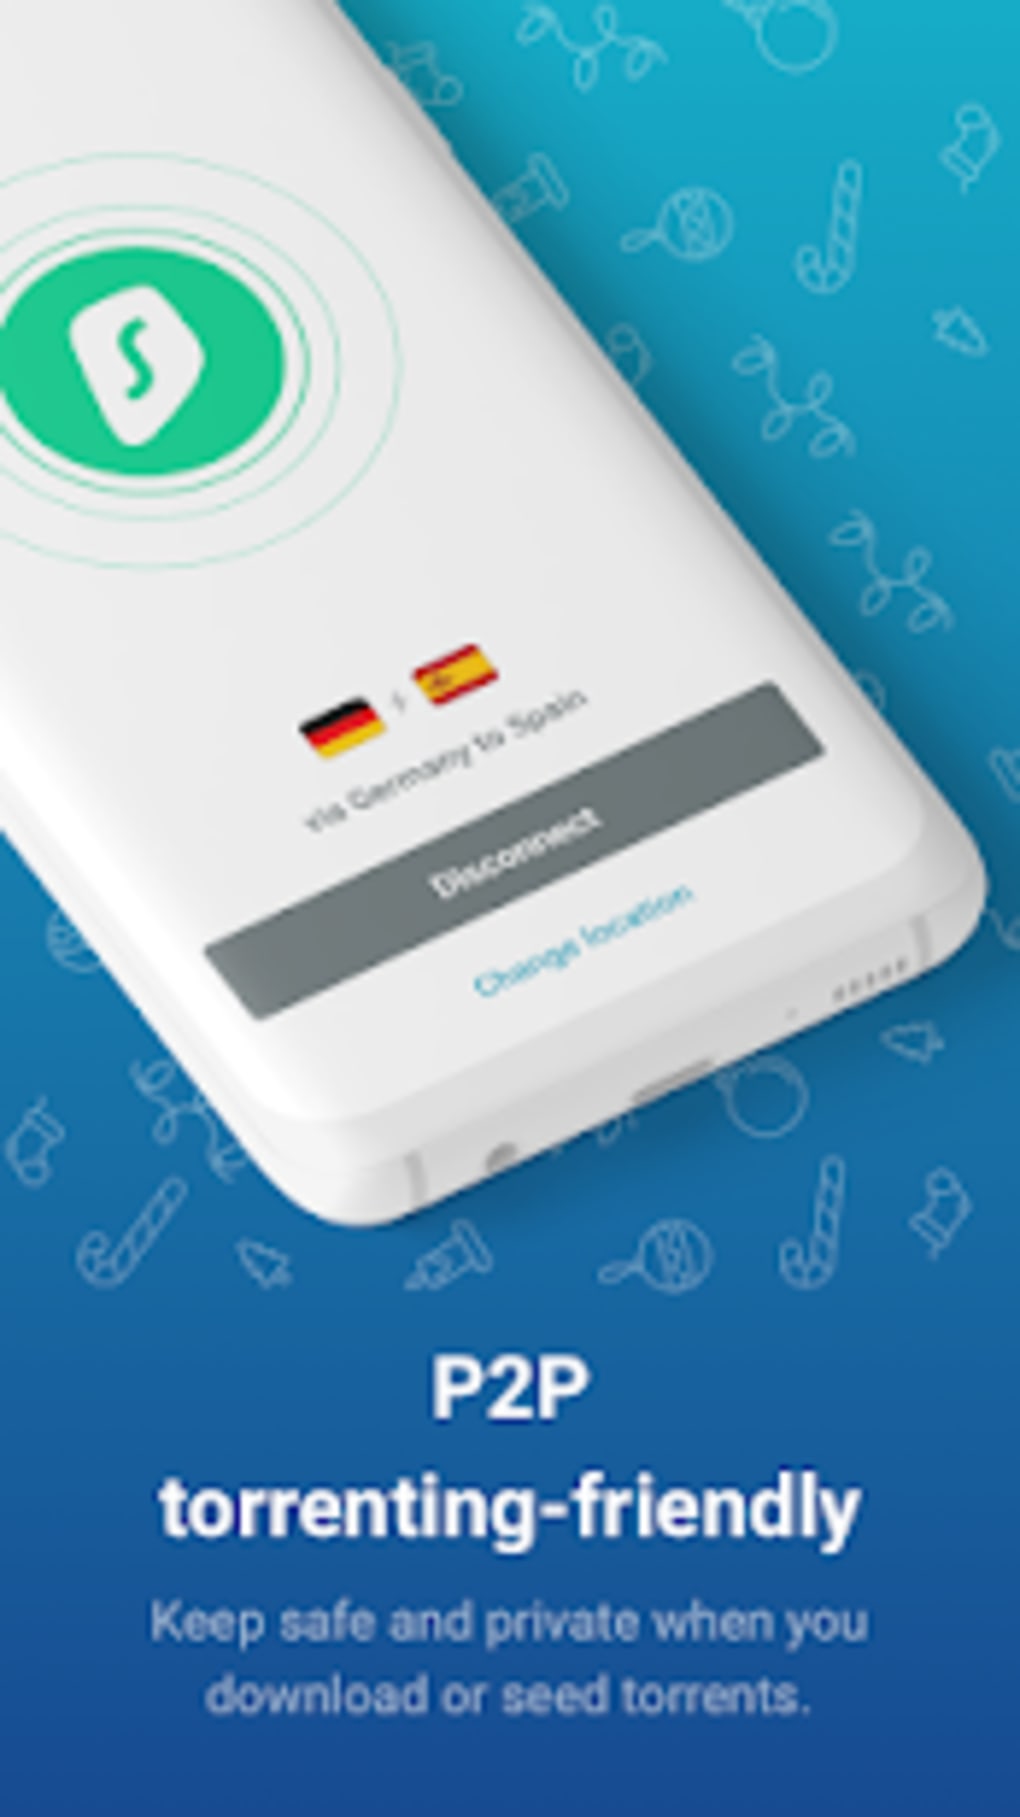 Download Android VPN APK (free trial available) - Surfshark